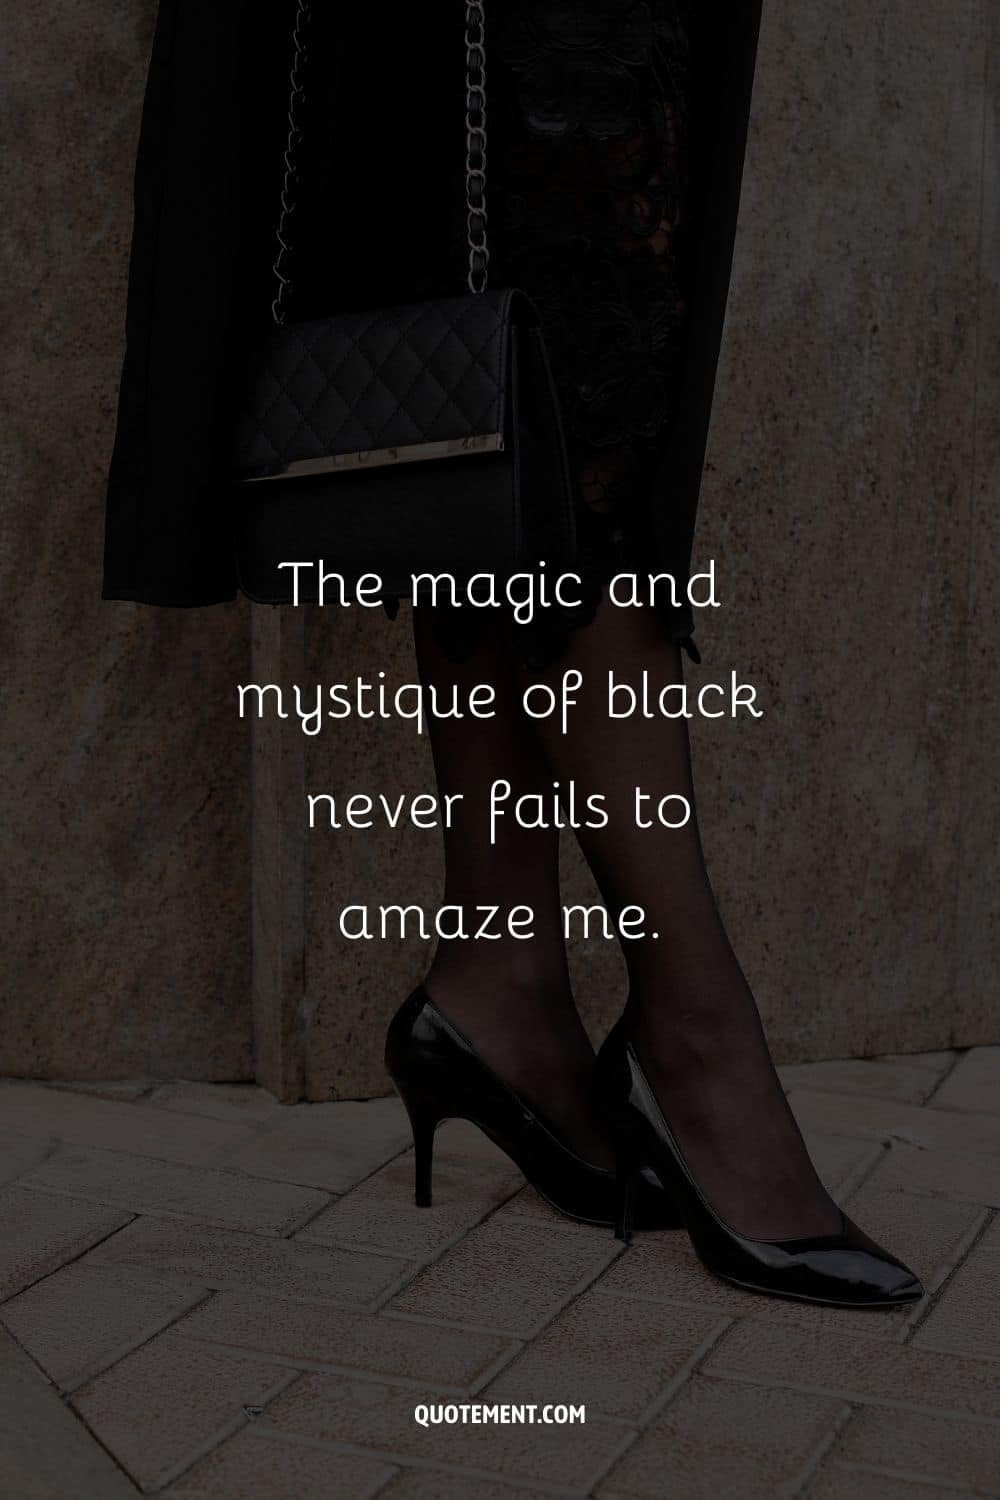 The magic and mystique of black never fails to amaze me.